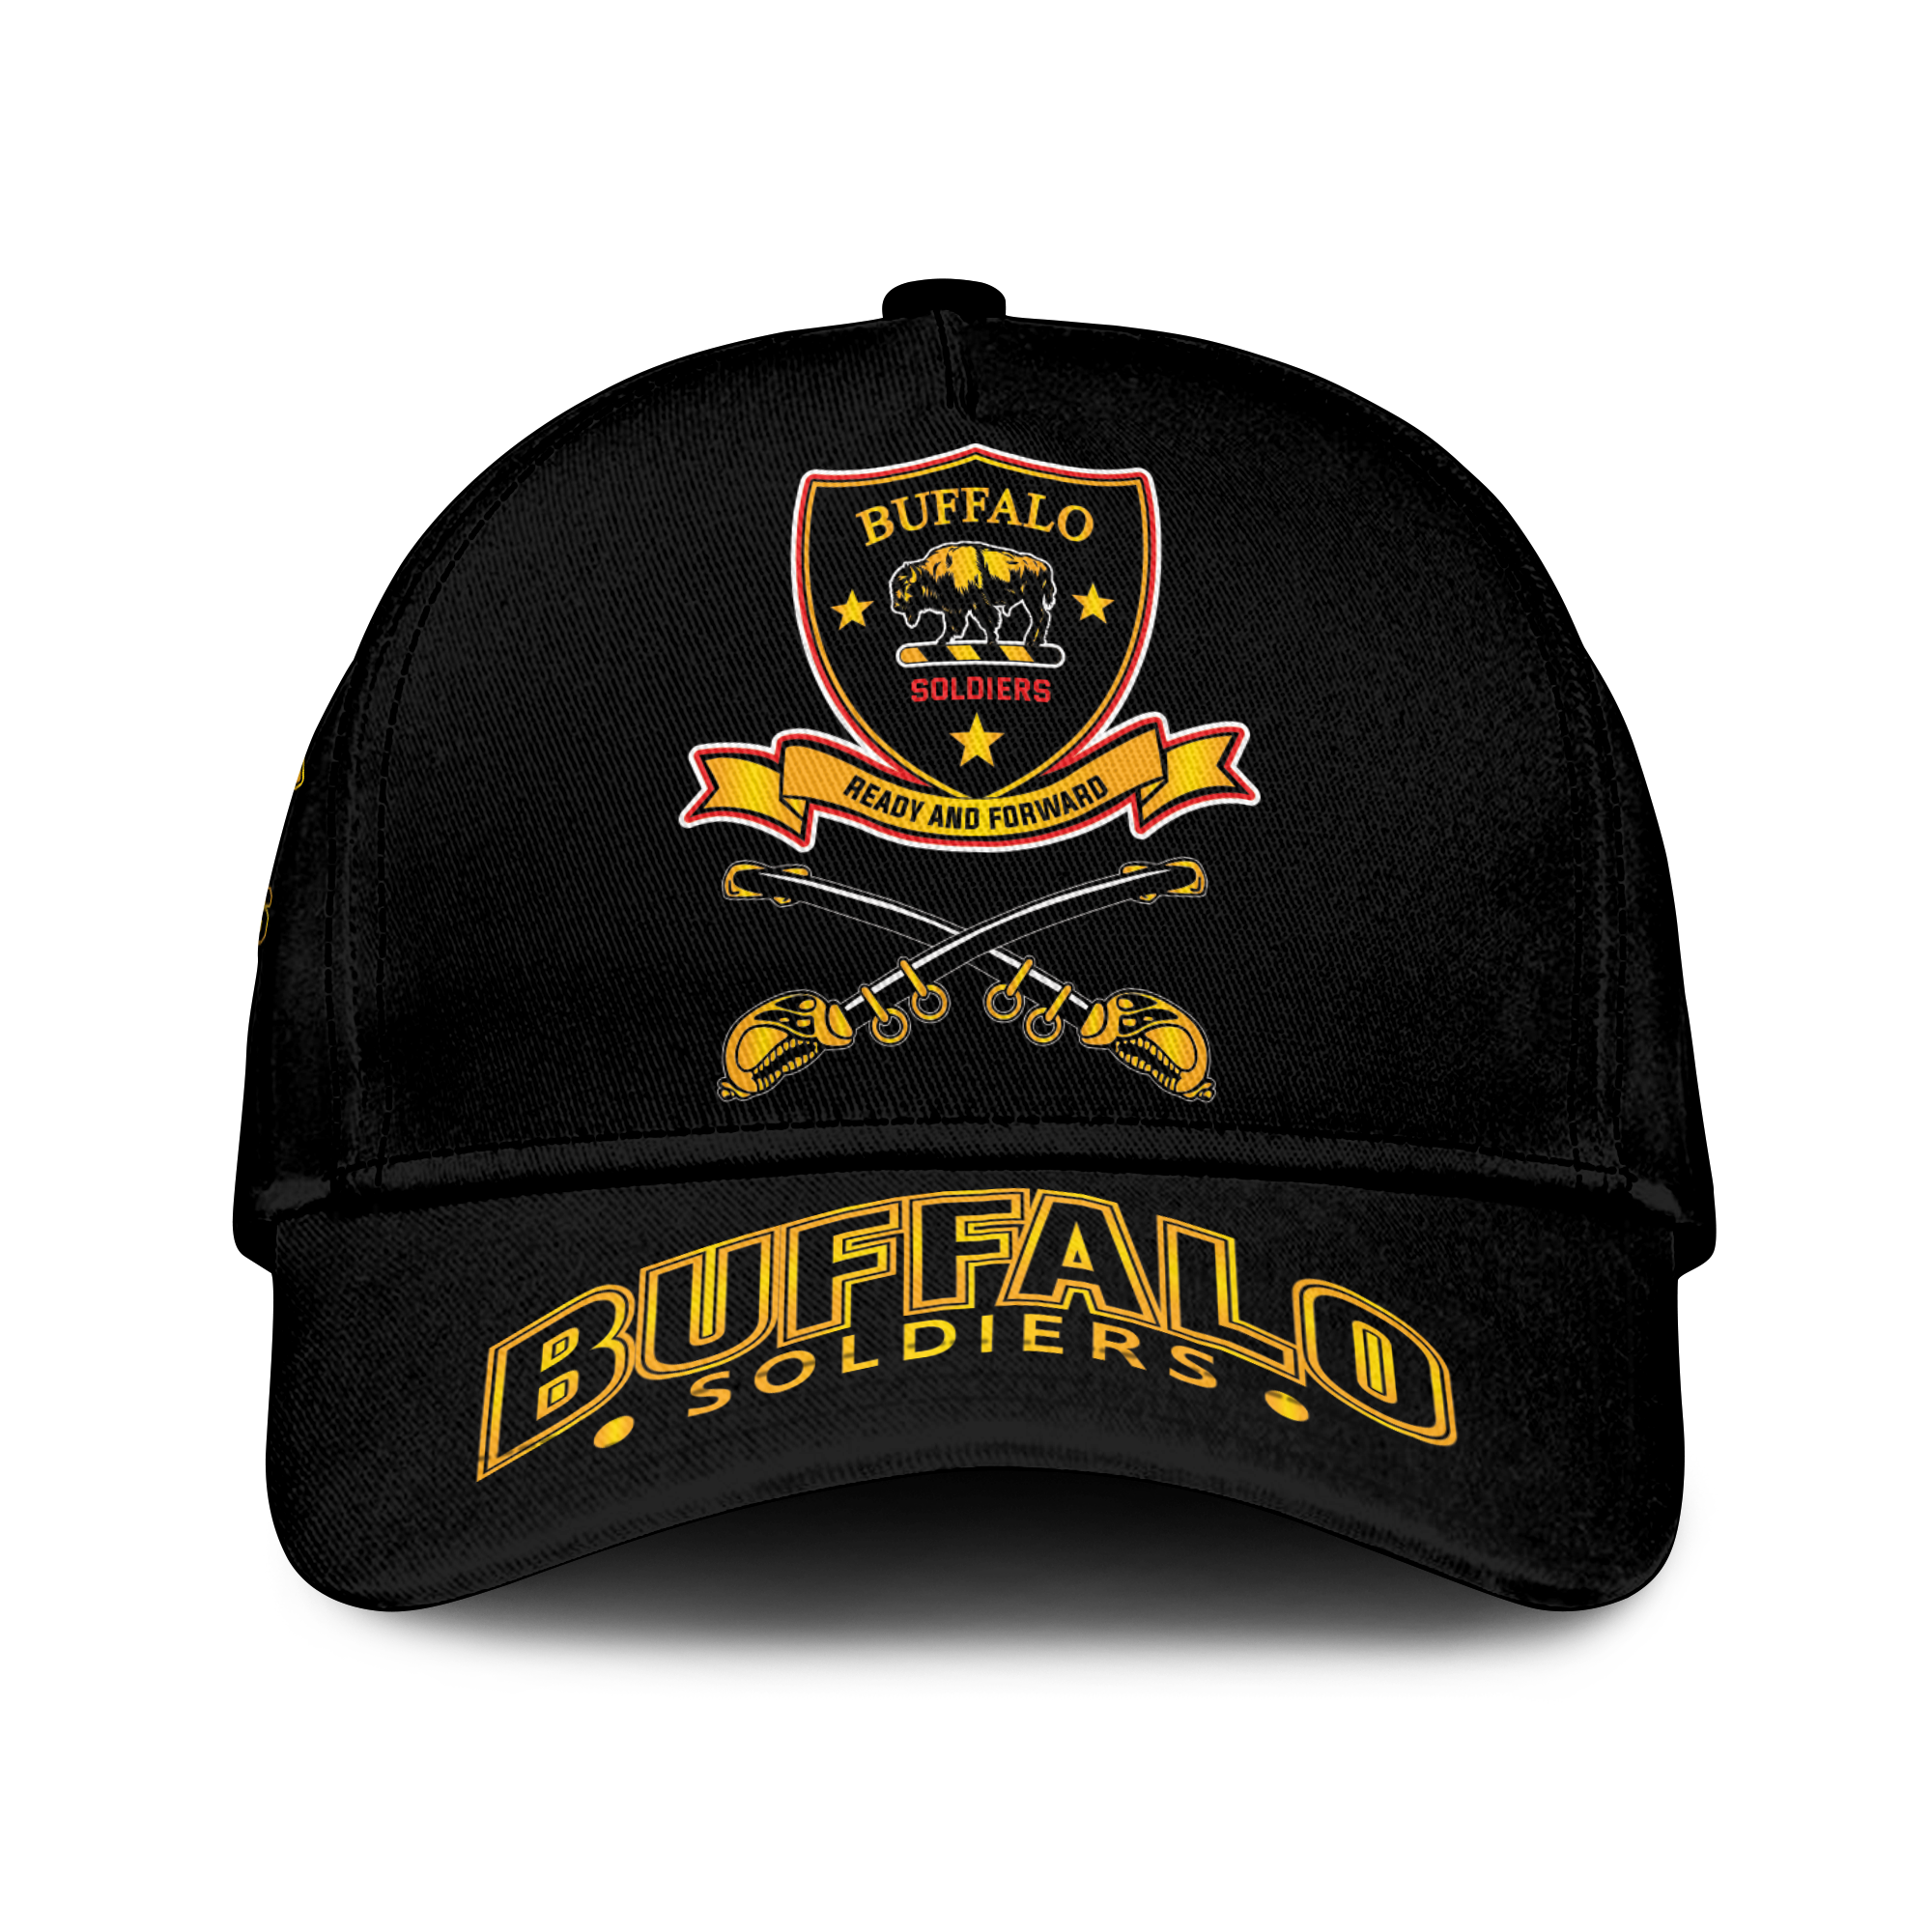 Buffalo Soldiers African American Legend Of The Black Soldiers Cap - LT2